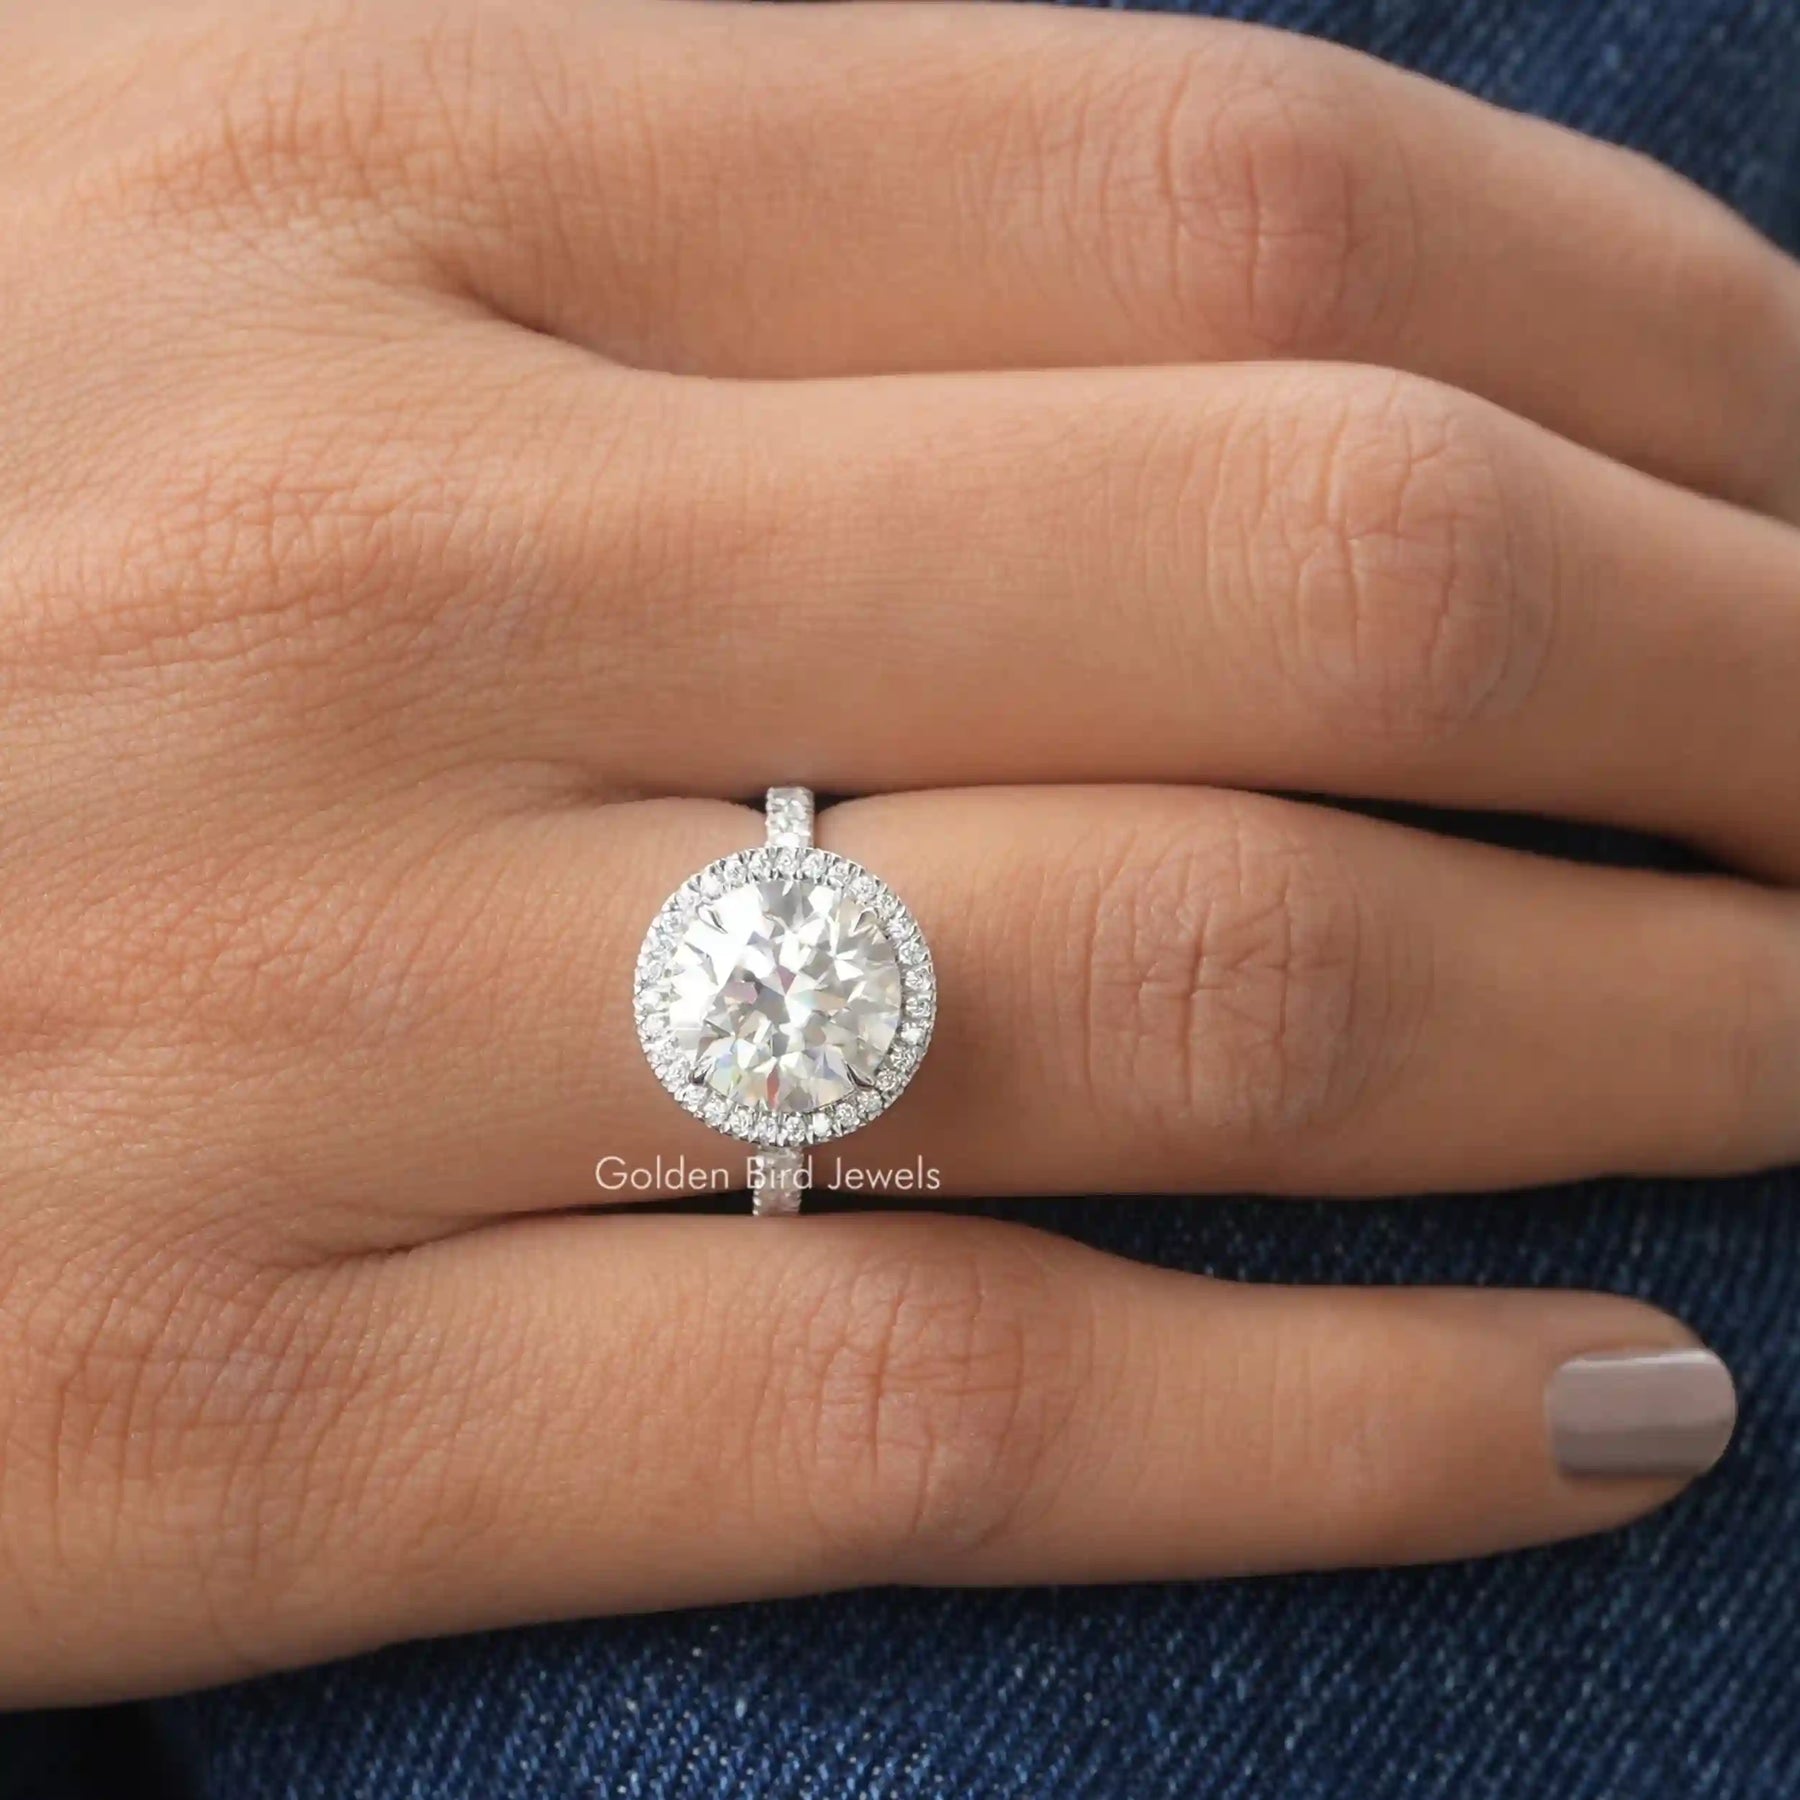 [This ring made of round cut moissanite with 14k white gold]-[Golden Bird Jewels]